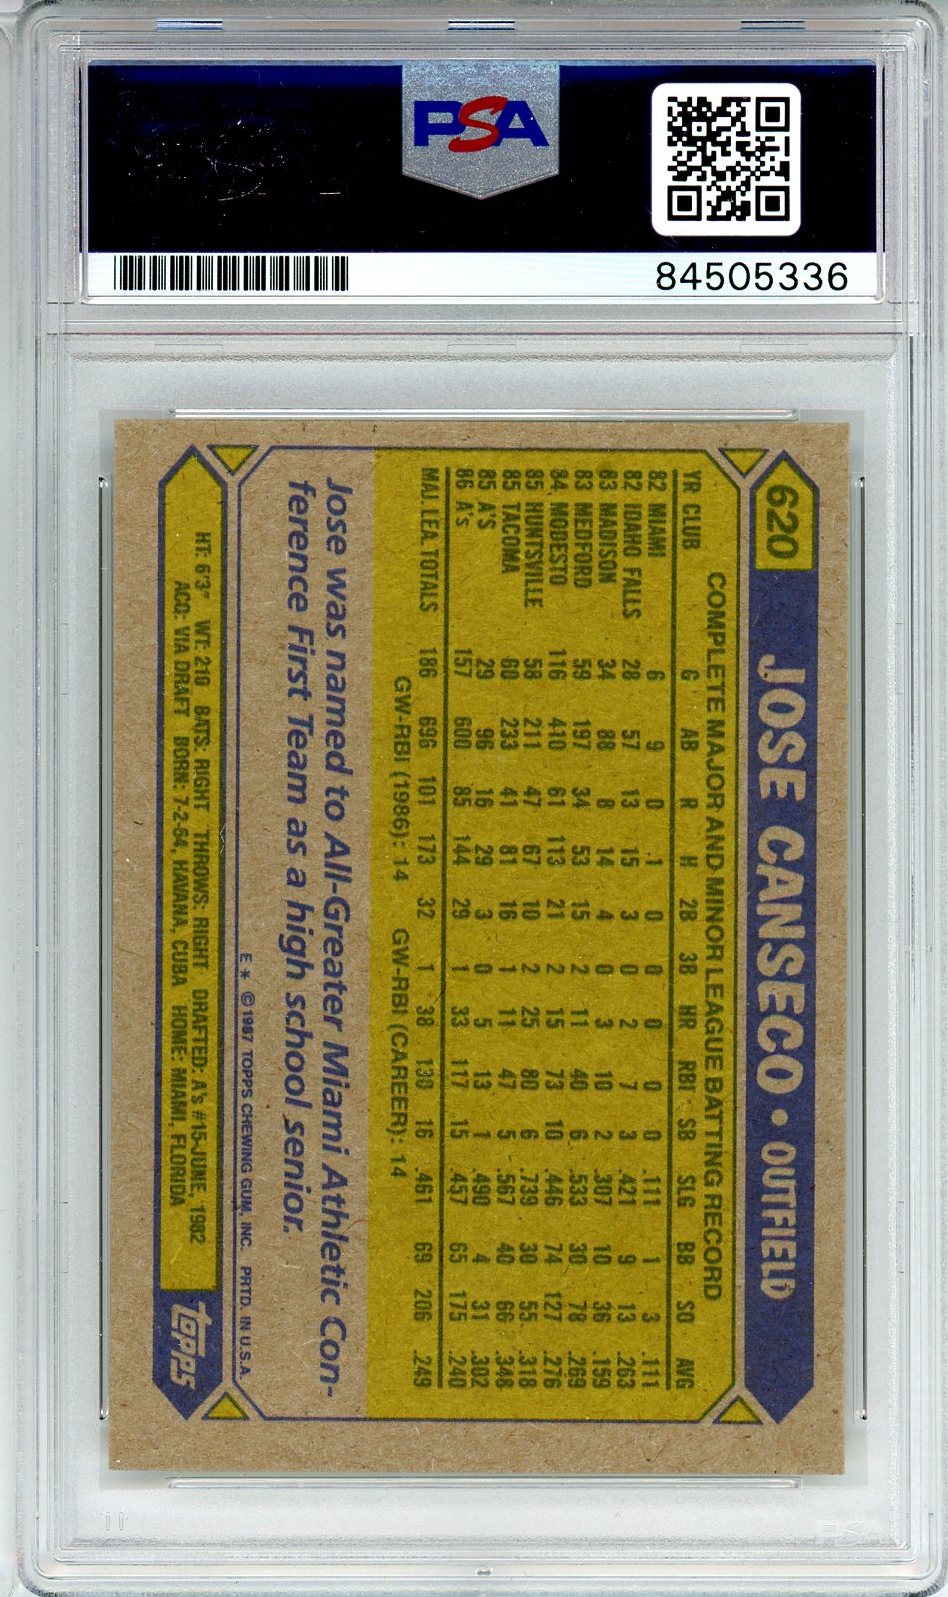 1987 TOPPS JOSE CANSECO AUTO RC ROOKIE #620 PSA DNA (336)